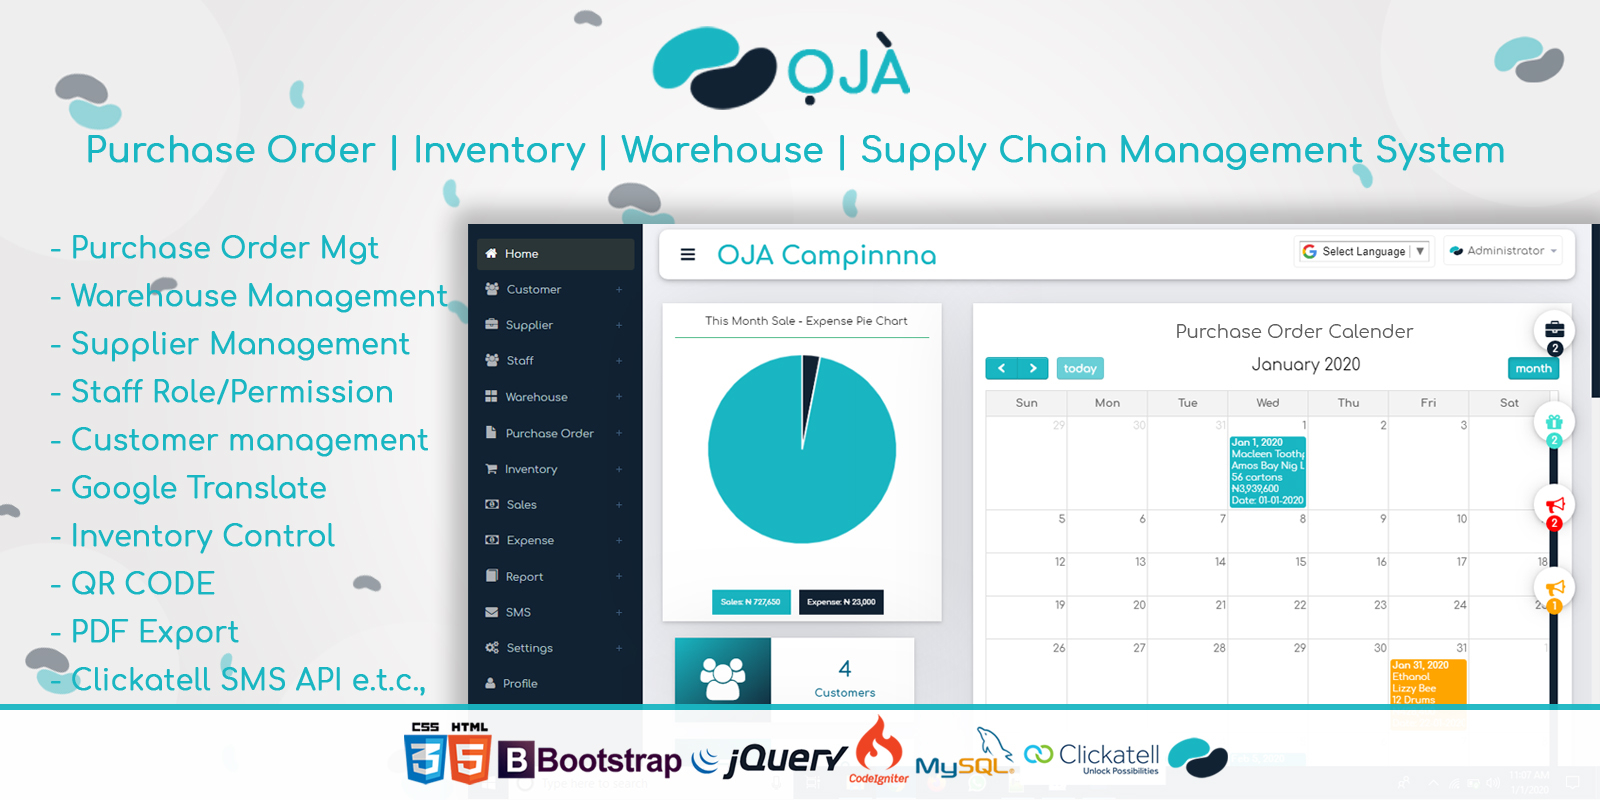 OJA Purchase Order | Inventory | Warehouse | Supply Chain Management System